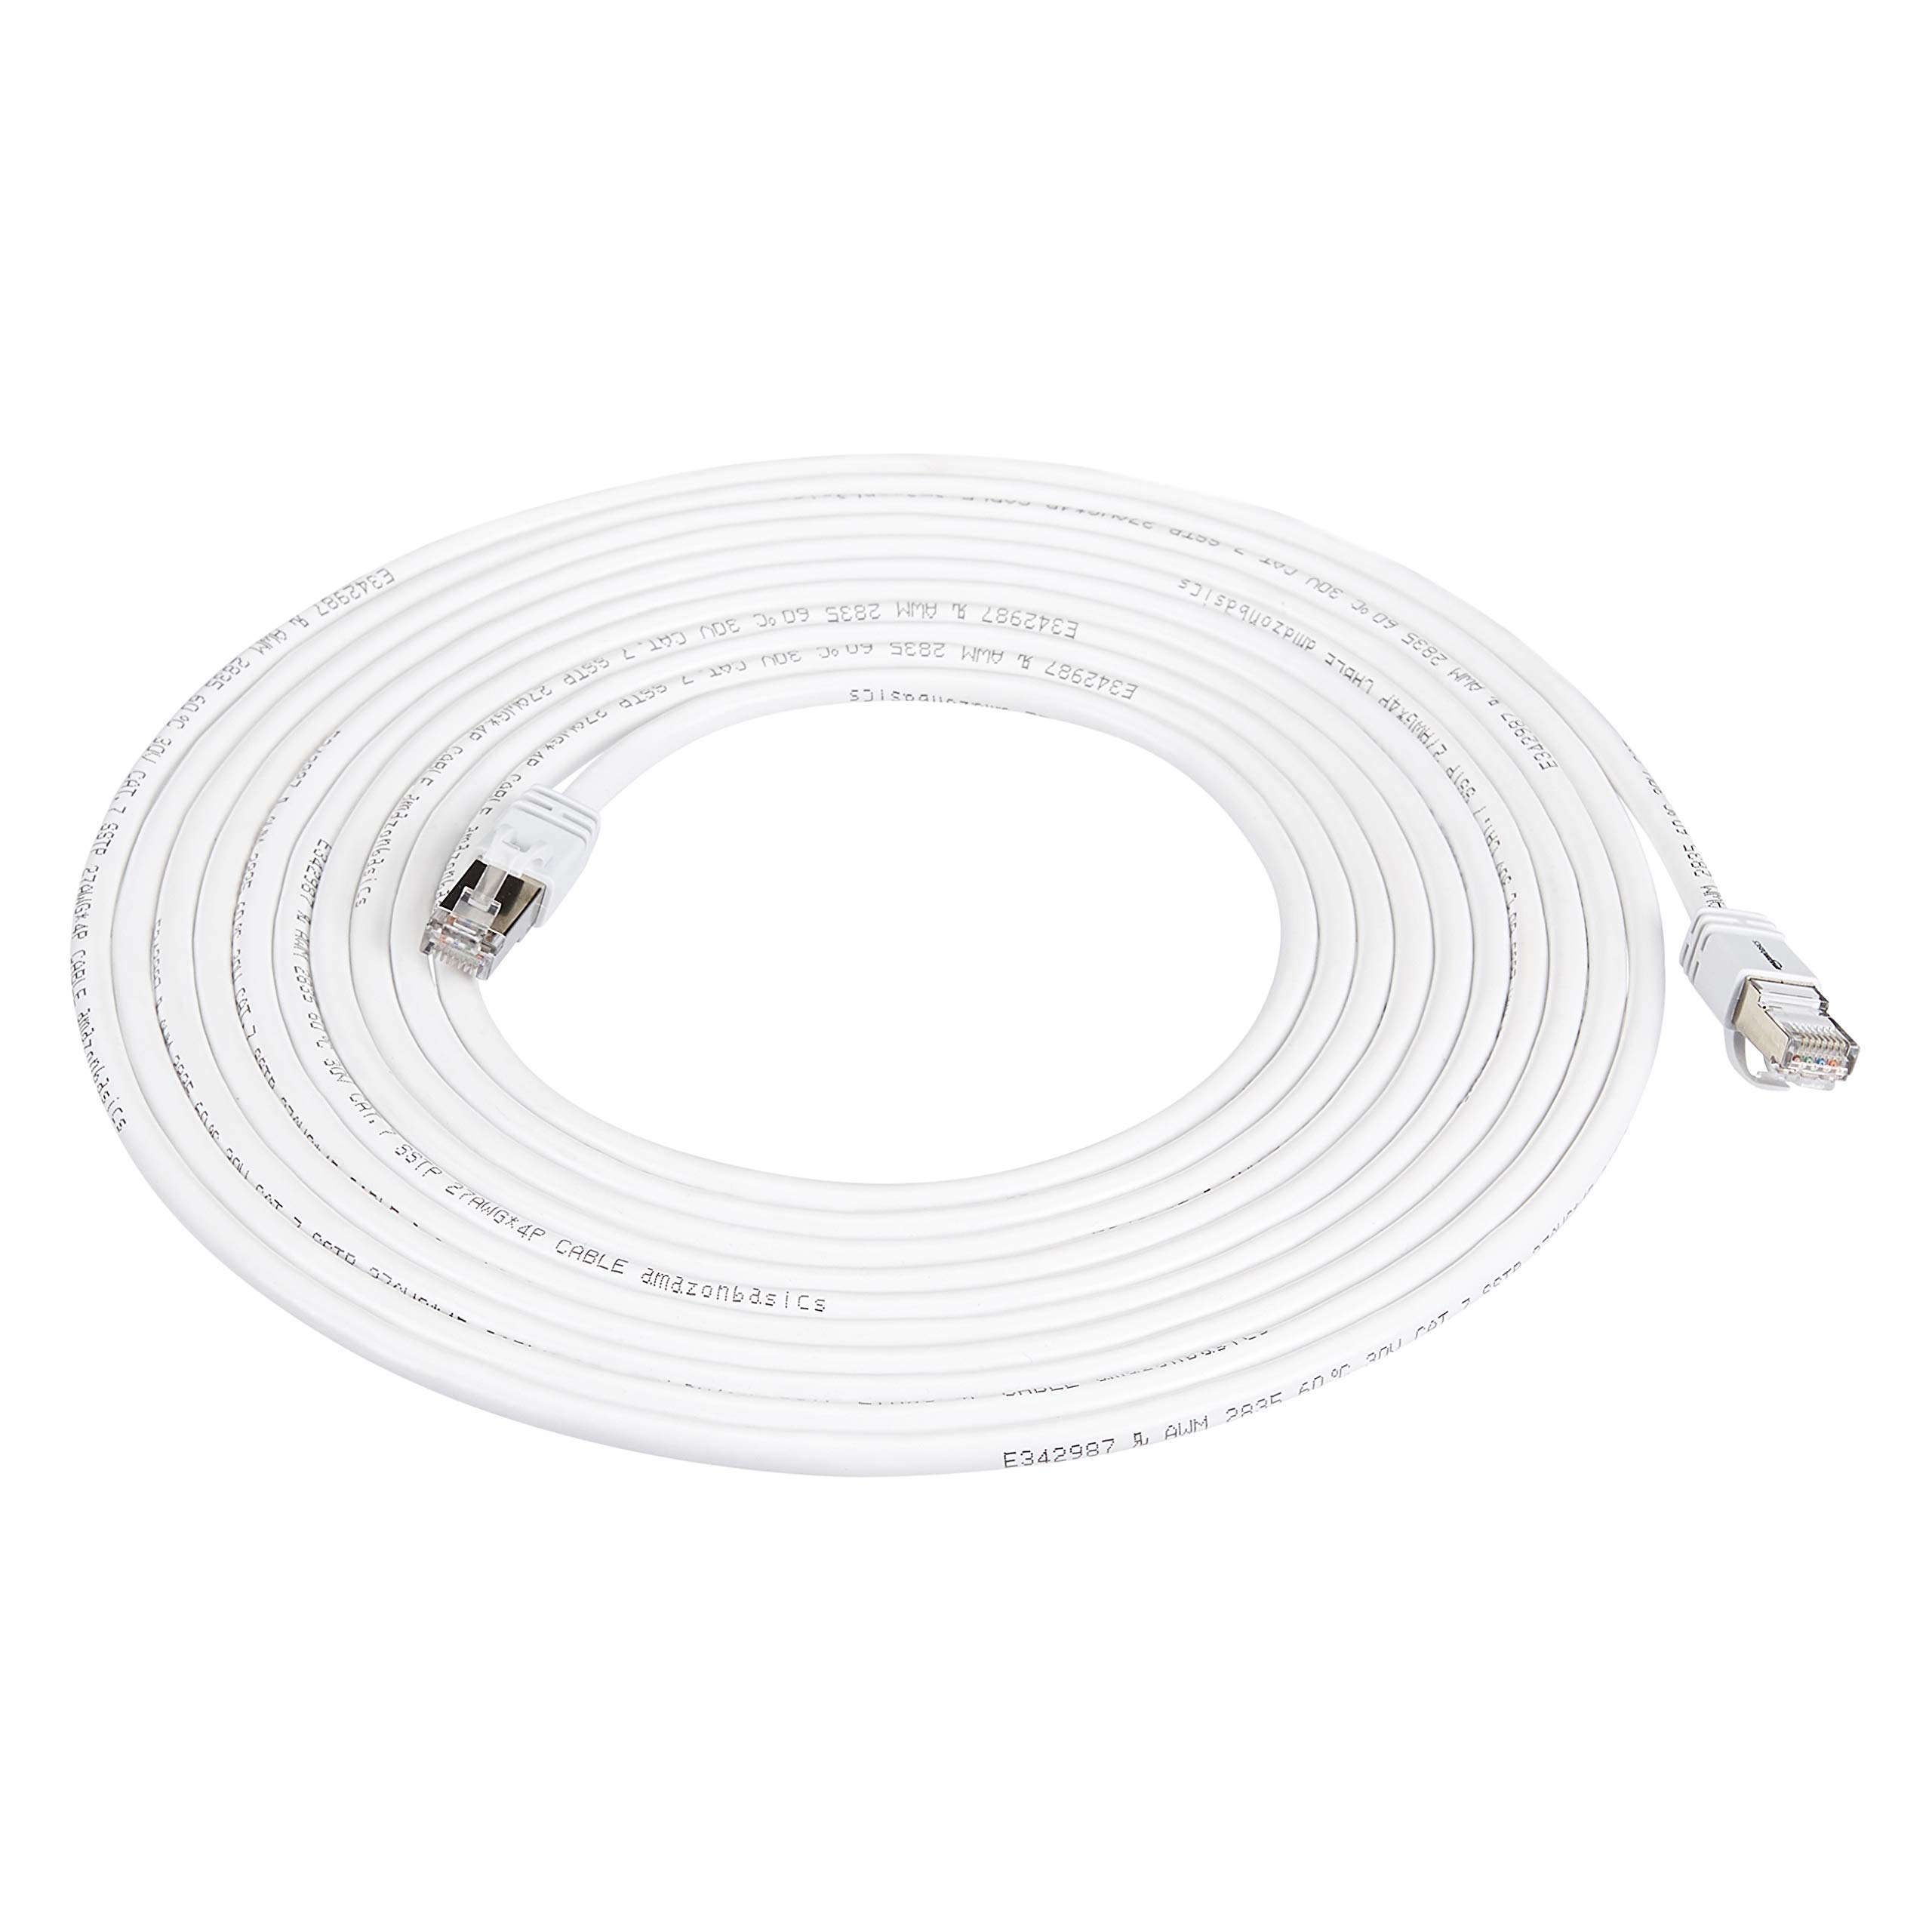 Amazon Basics RJ45 50 Foot Braided Nylon Cat 7 Ethernet Patch Cable $6.43 & more